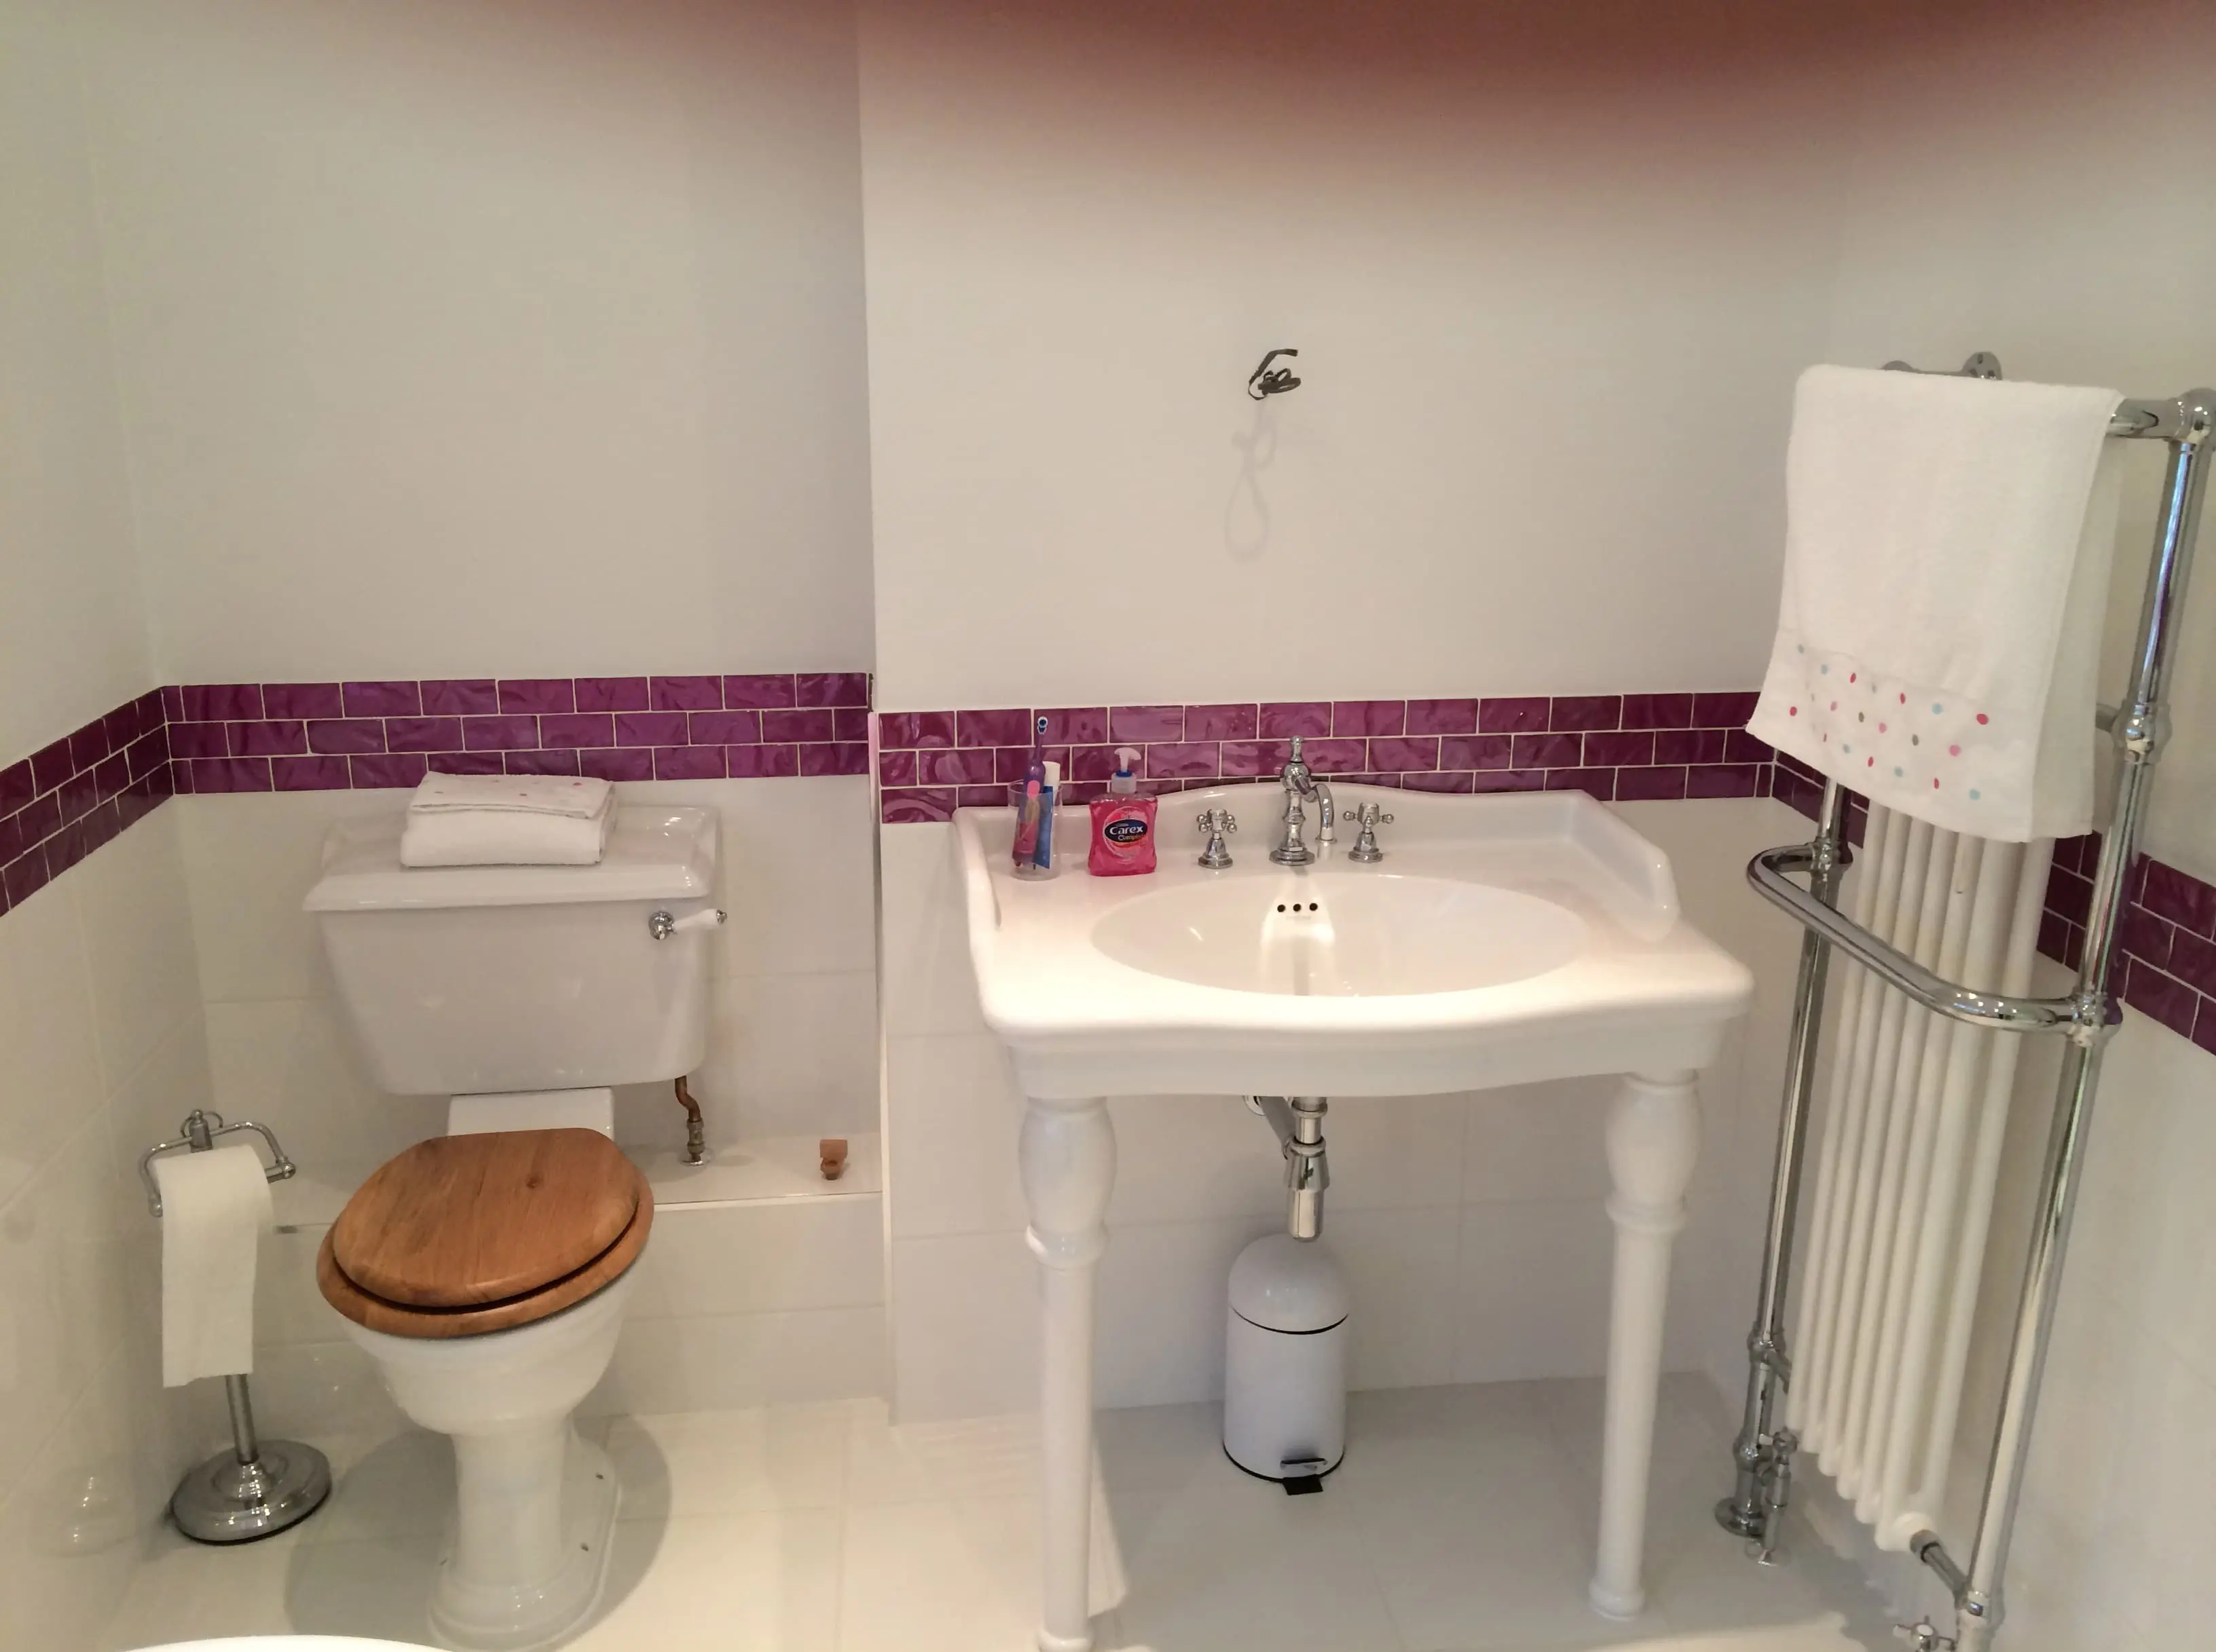 With&nbsp;over 42 years of experience, I can supply and fit bathroom fittings at competitive prices in the following areas:ReadingShinfieldCalcotWokinghamBracknellWoodleyAnd many areas more in and around Southcote!Whether you want me to install a&nbsp;new wet room&nbsp;or just&nbsp;re-tile&nbsp;your existing bathroom, I can give your home a new look. I take great pride in providing a personalised service to&nbsp;suit your budget and taste.&nbsp;